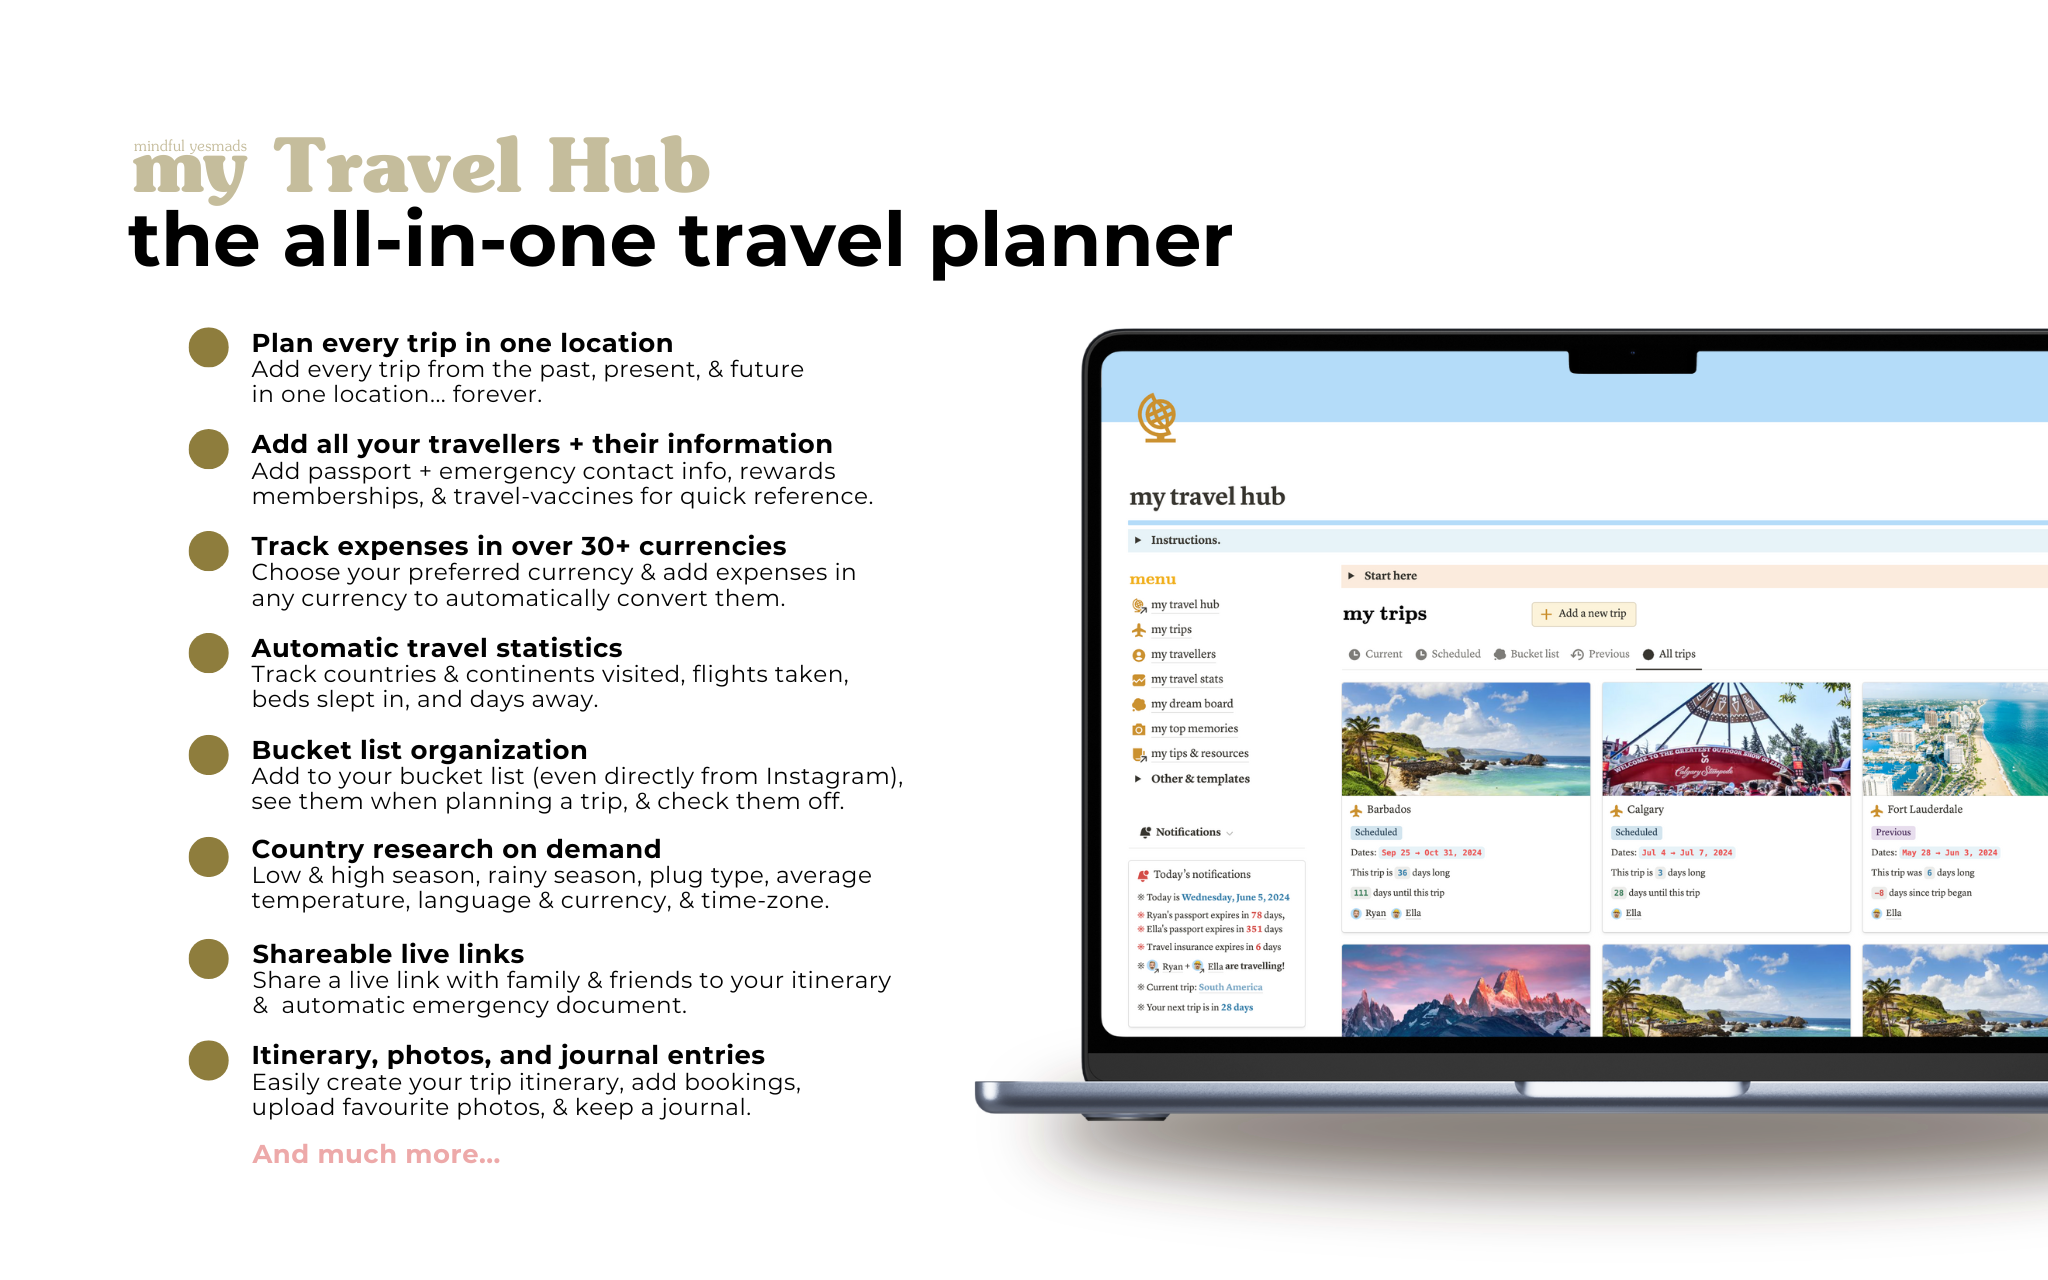 A comprehensive travel planning tool. 
Document every trip for the rest of your life.
Designed with the modern traveler in mind.
Create & update your itinerary on the go.
Track all your expenses in 30+ currencies.
Countless automations.